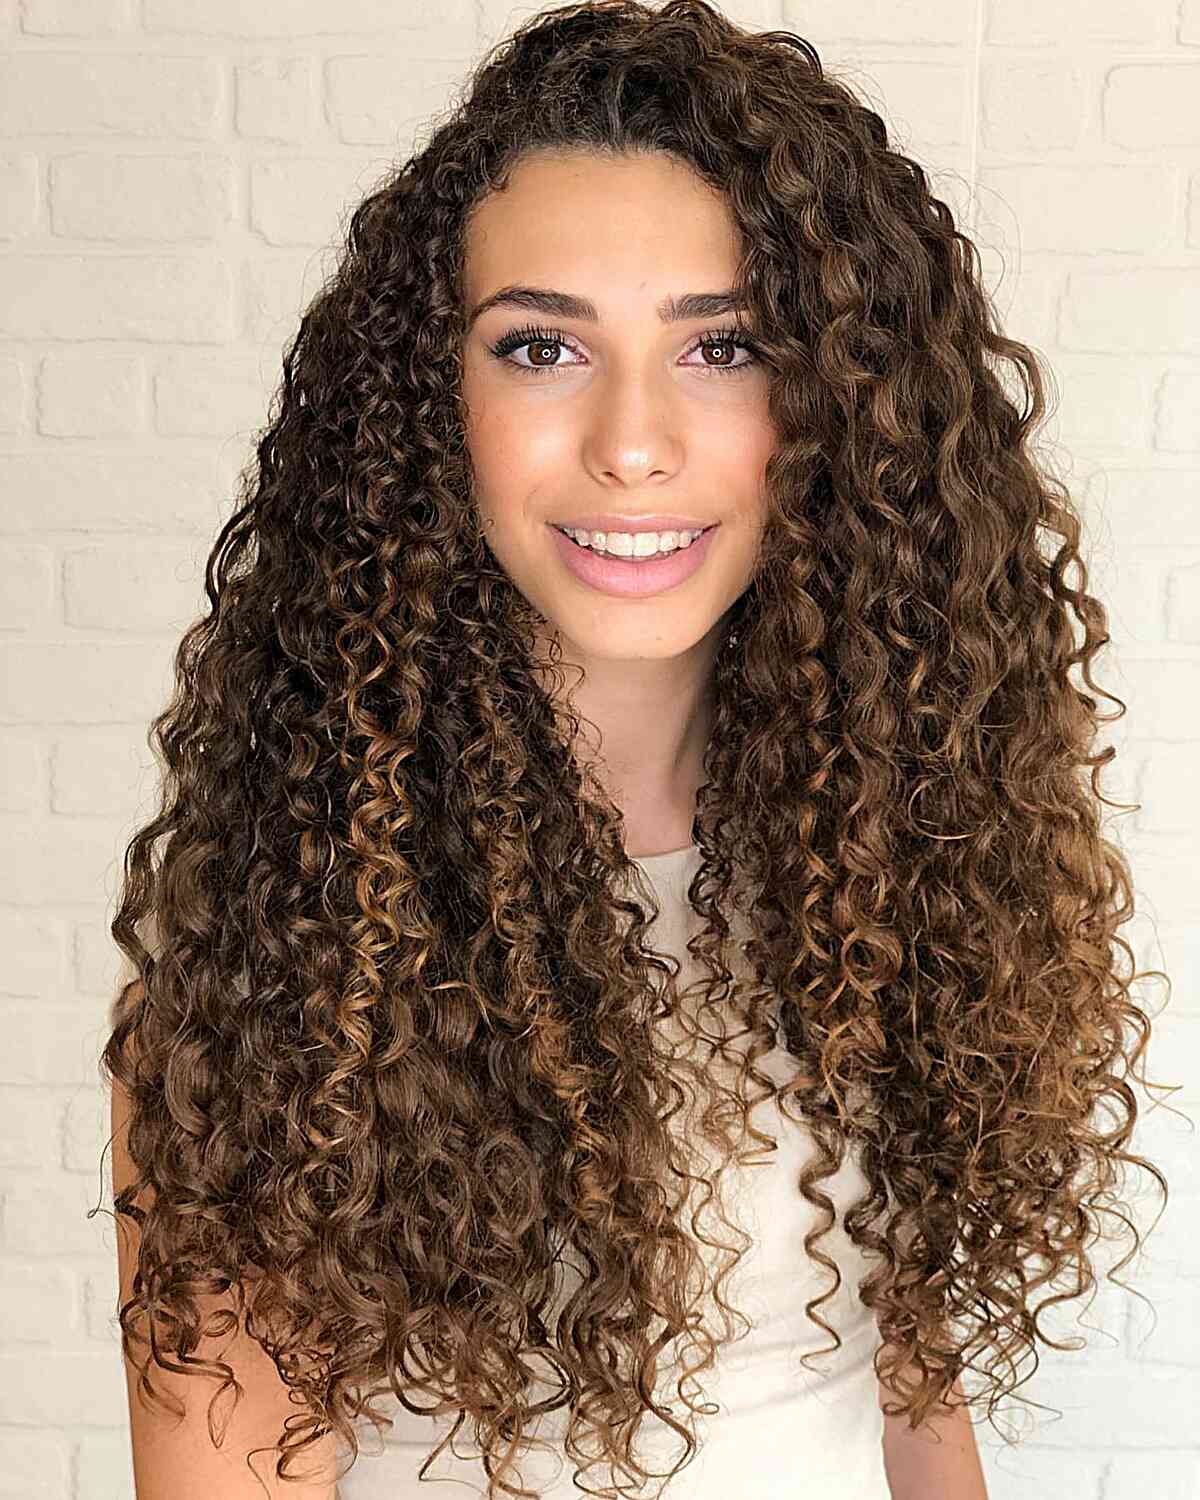 Long Curly Hair with a Subtle Side Part